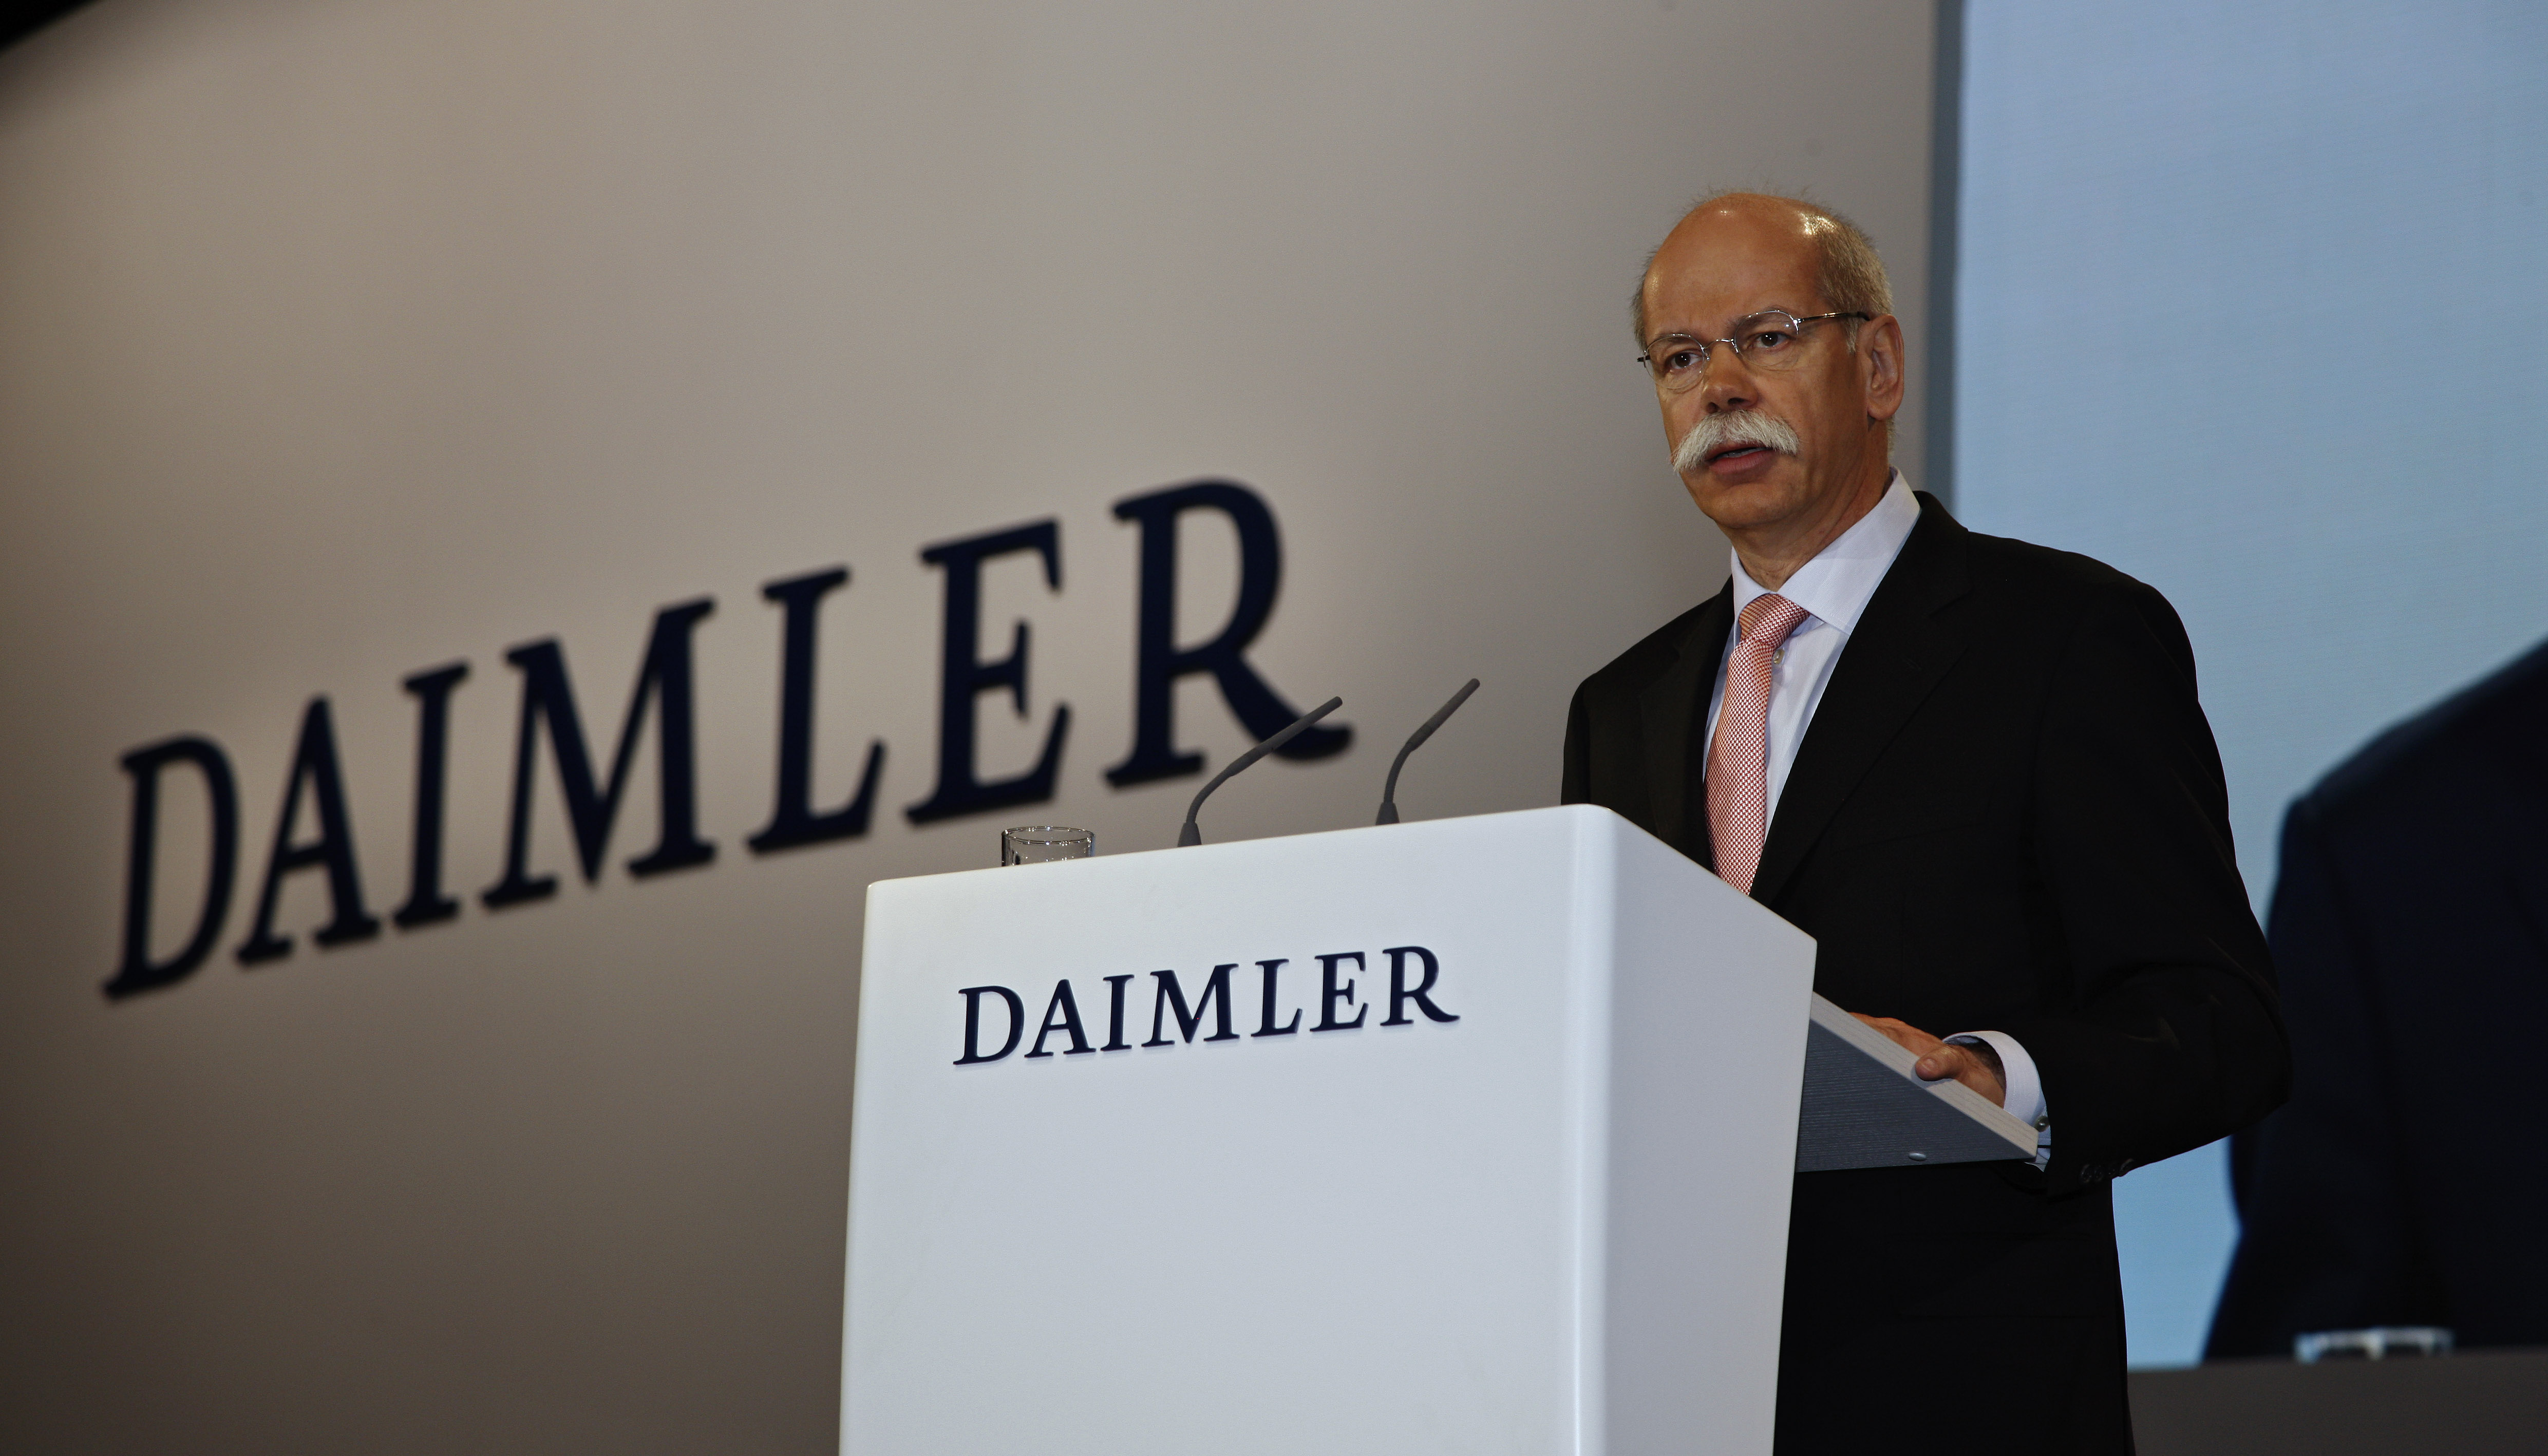 Daimler May Team with Apple, Google on Self-Driving Vehicles